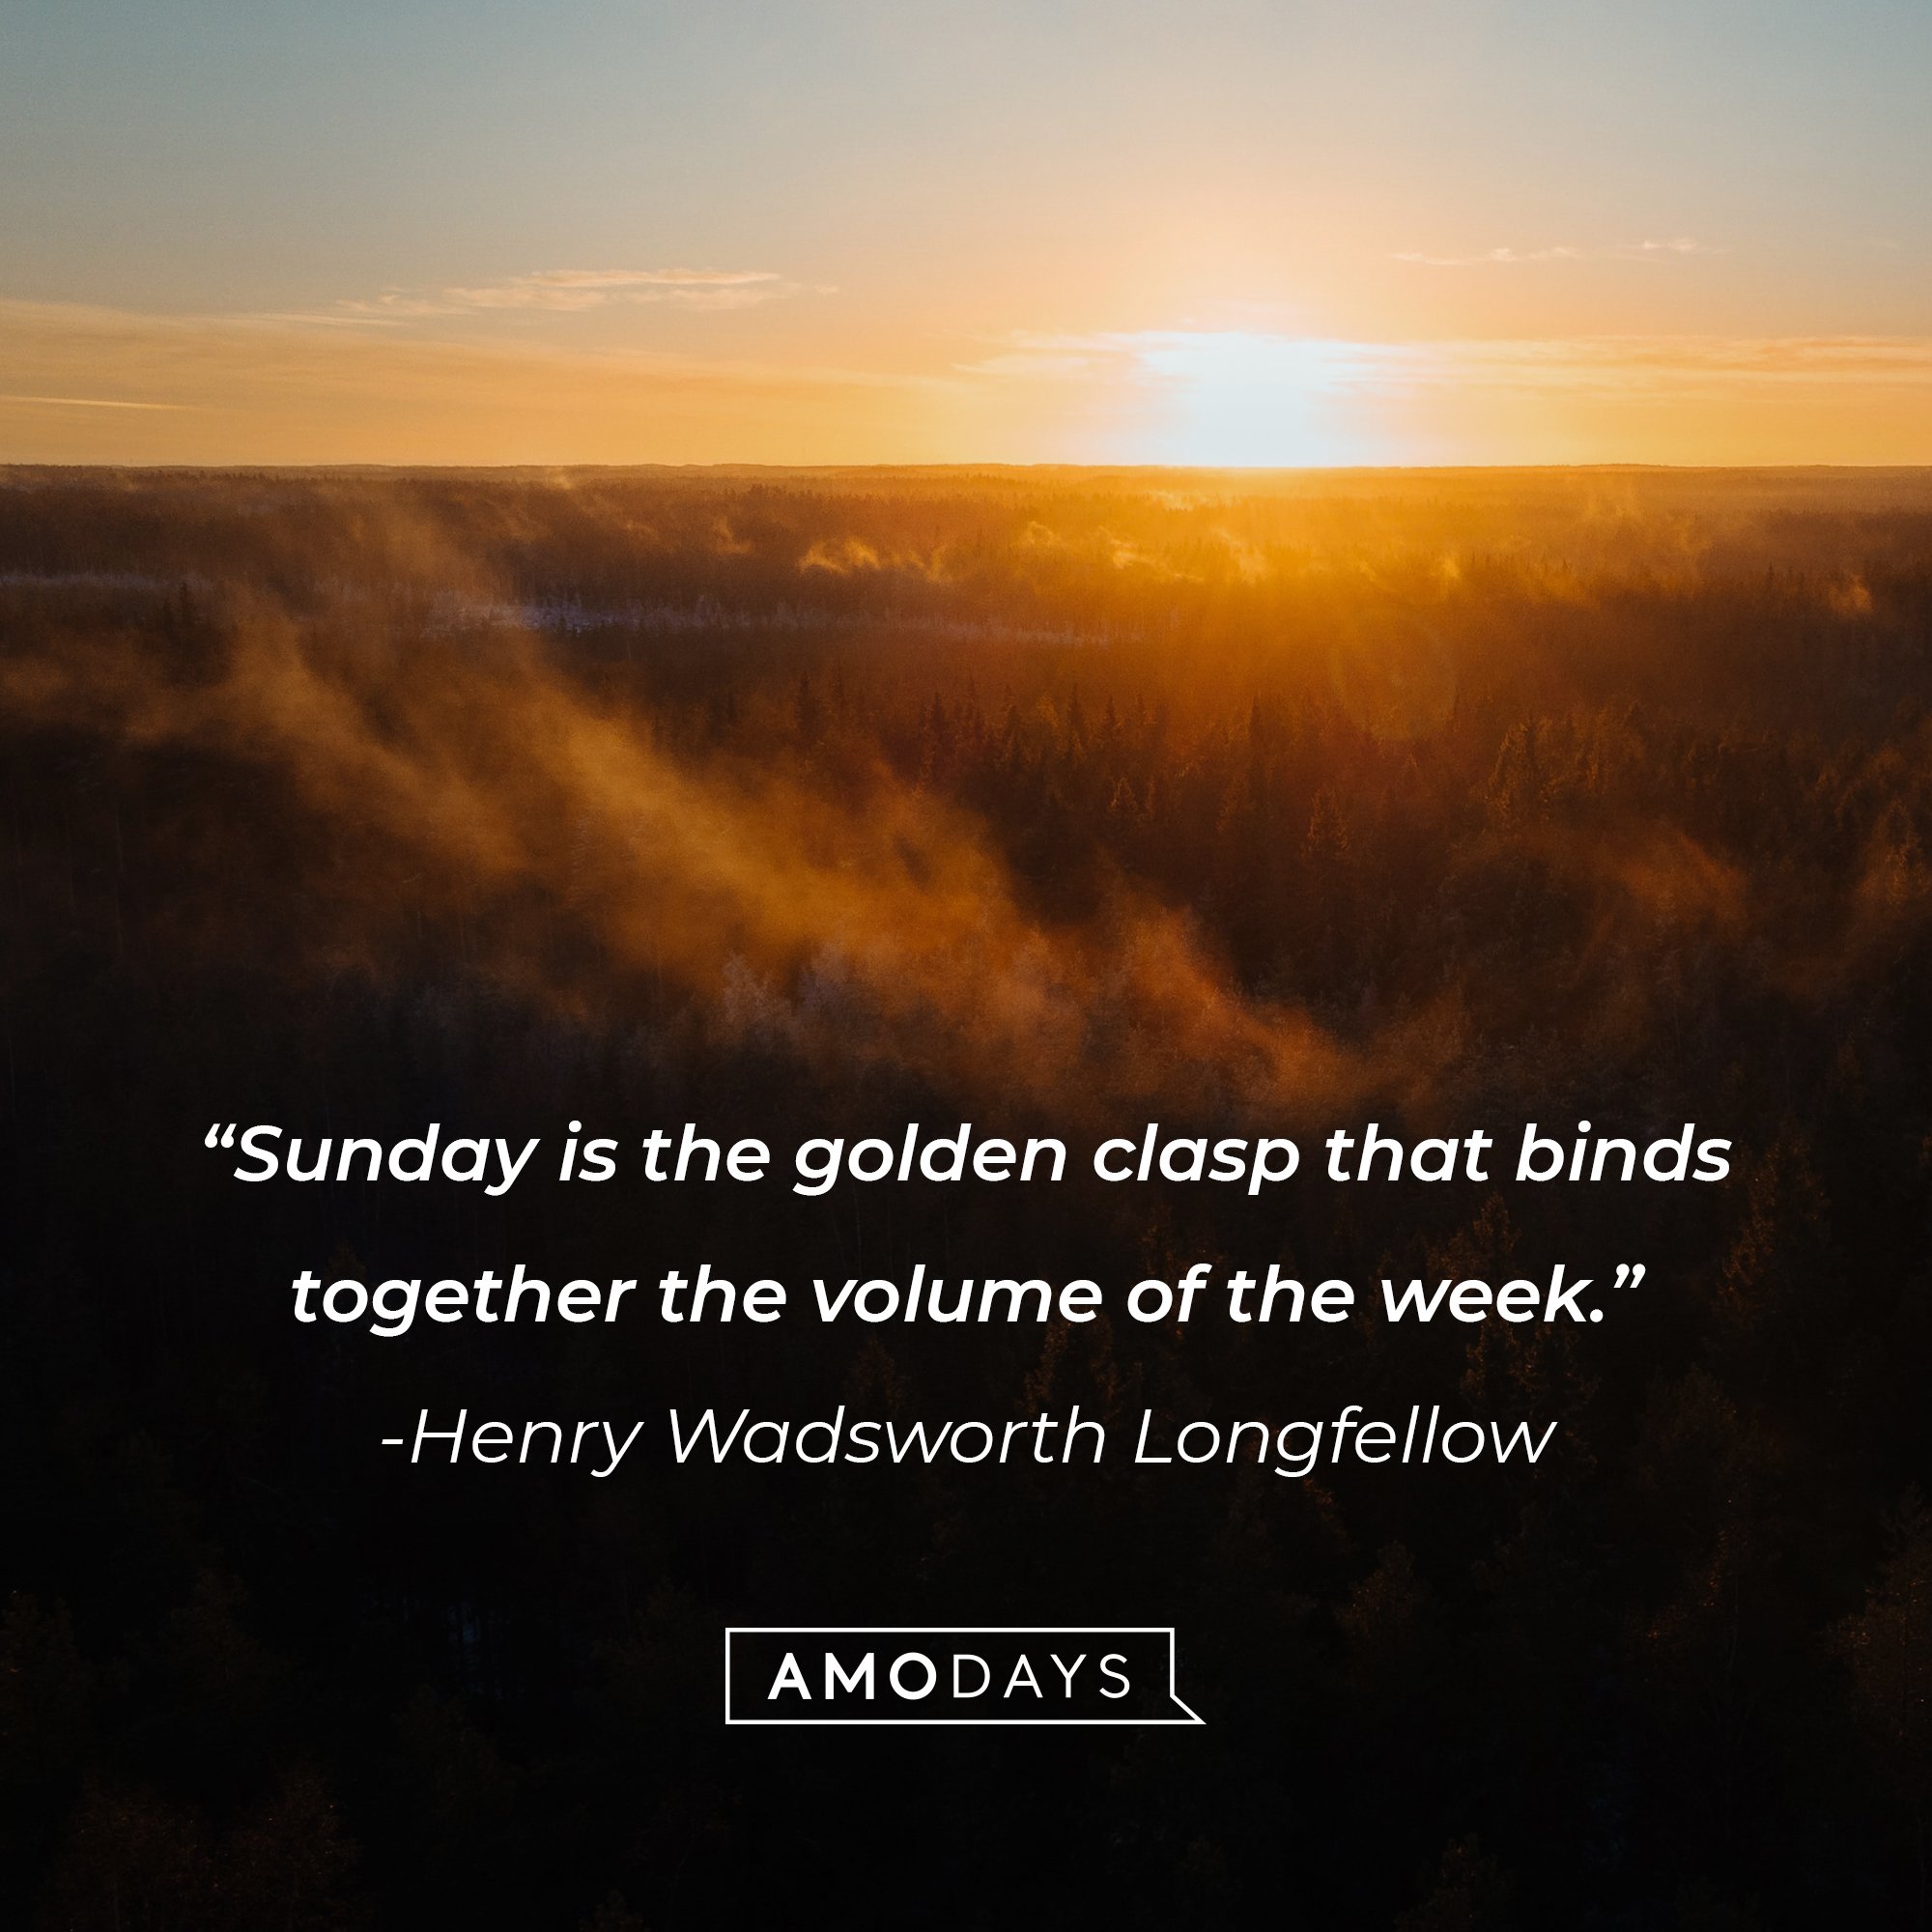 Henry Wadsworth Longfellow's quote: “Sunday is the golden clasp that binds together the volume of the week.” | Image: AmoDays